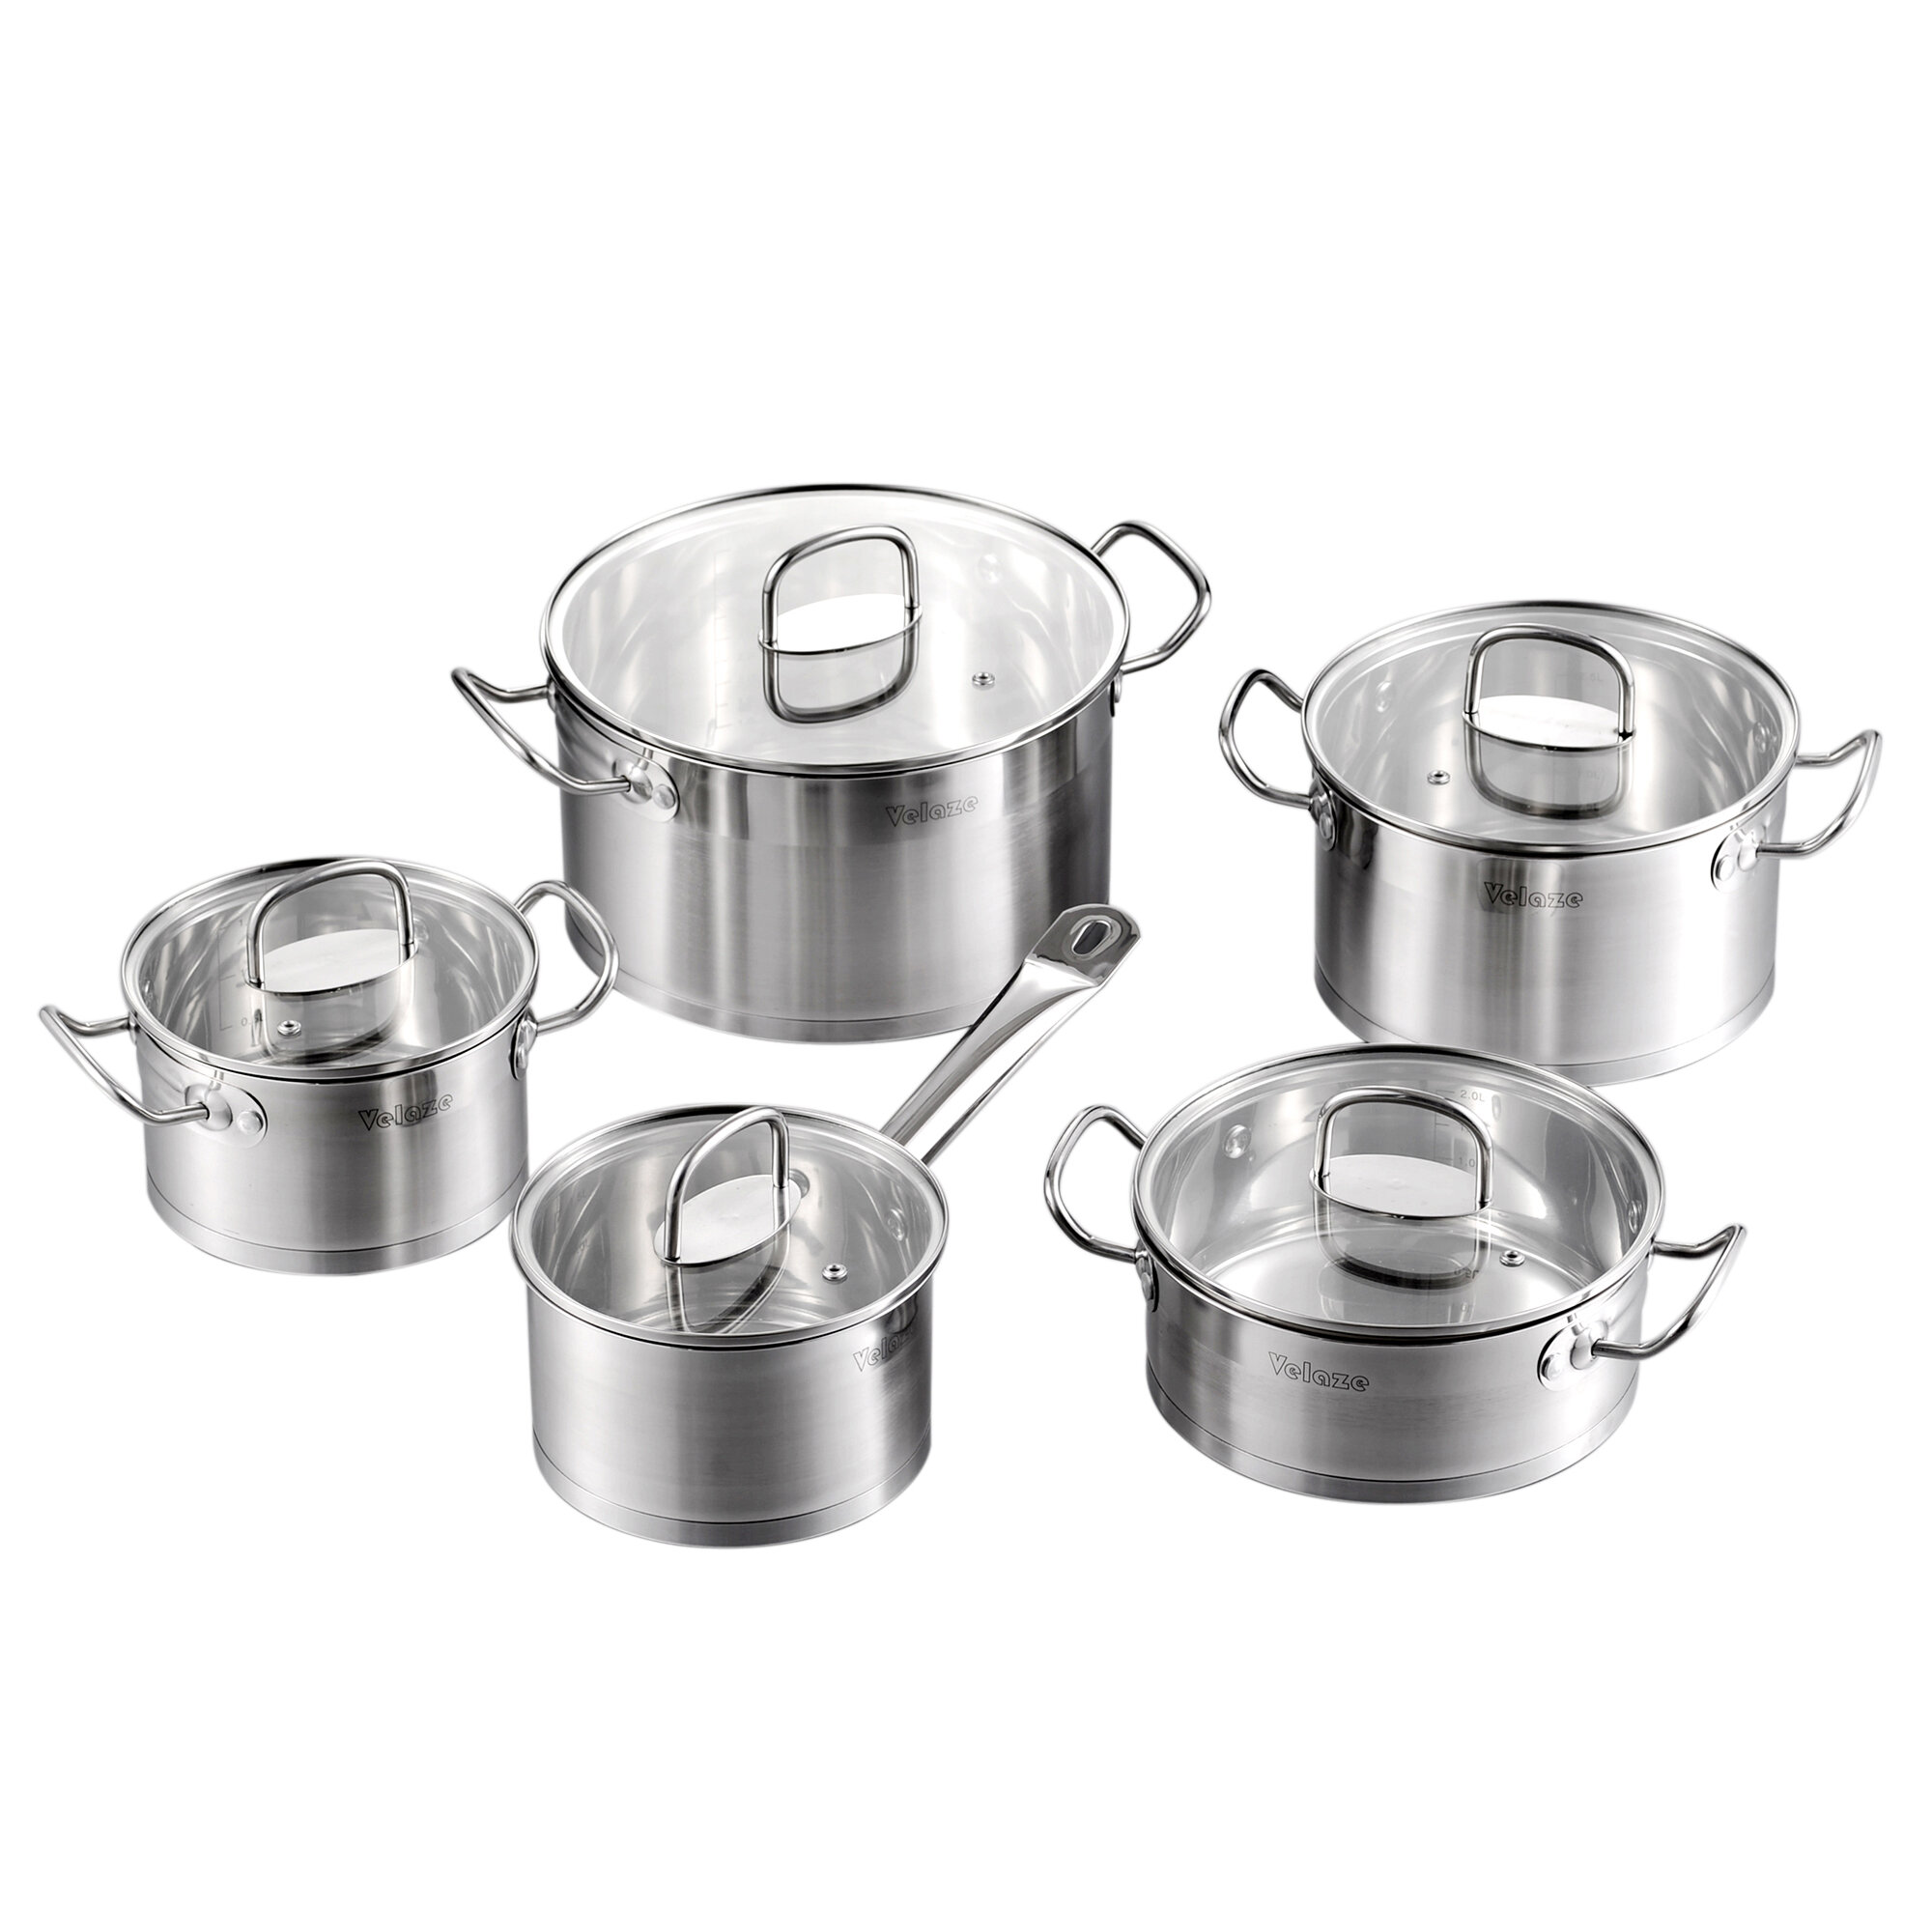 Cookware Set Kitchen Stainless Steel 9-Piece Cooking Pot Set,Induction  Safe,Non Stick Saucepan,Casserole with Glass lid (Silver)